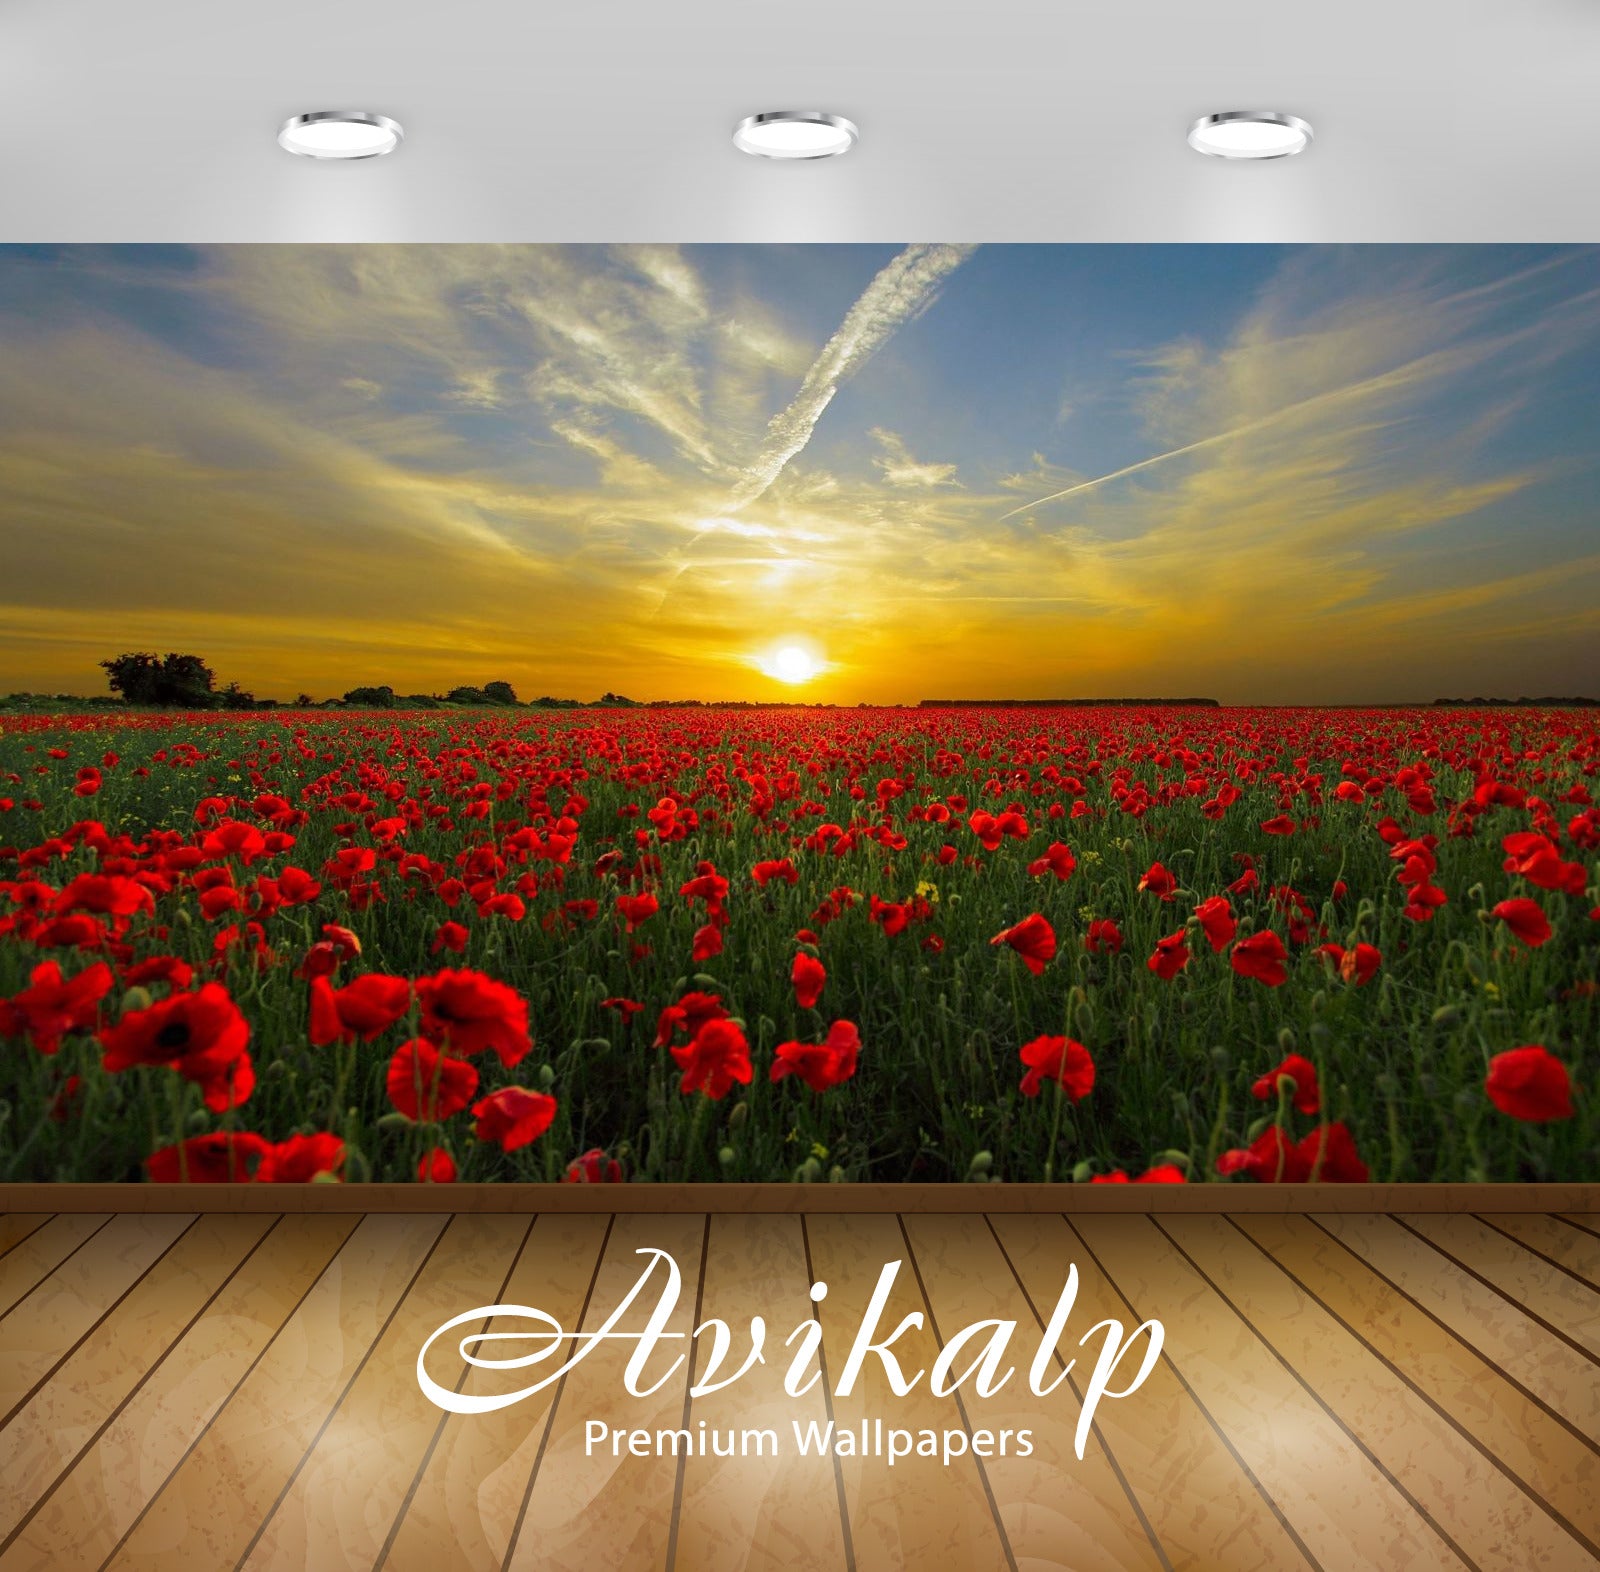 Avikalp Exclusive Awi2890 Orange Sunset Field With Red Poppies Nature Summer Landscape Full HD Wallp